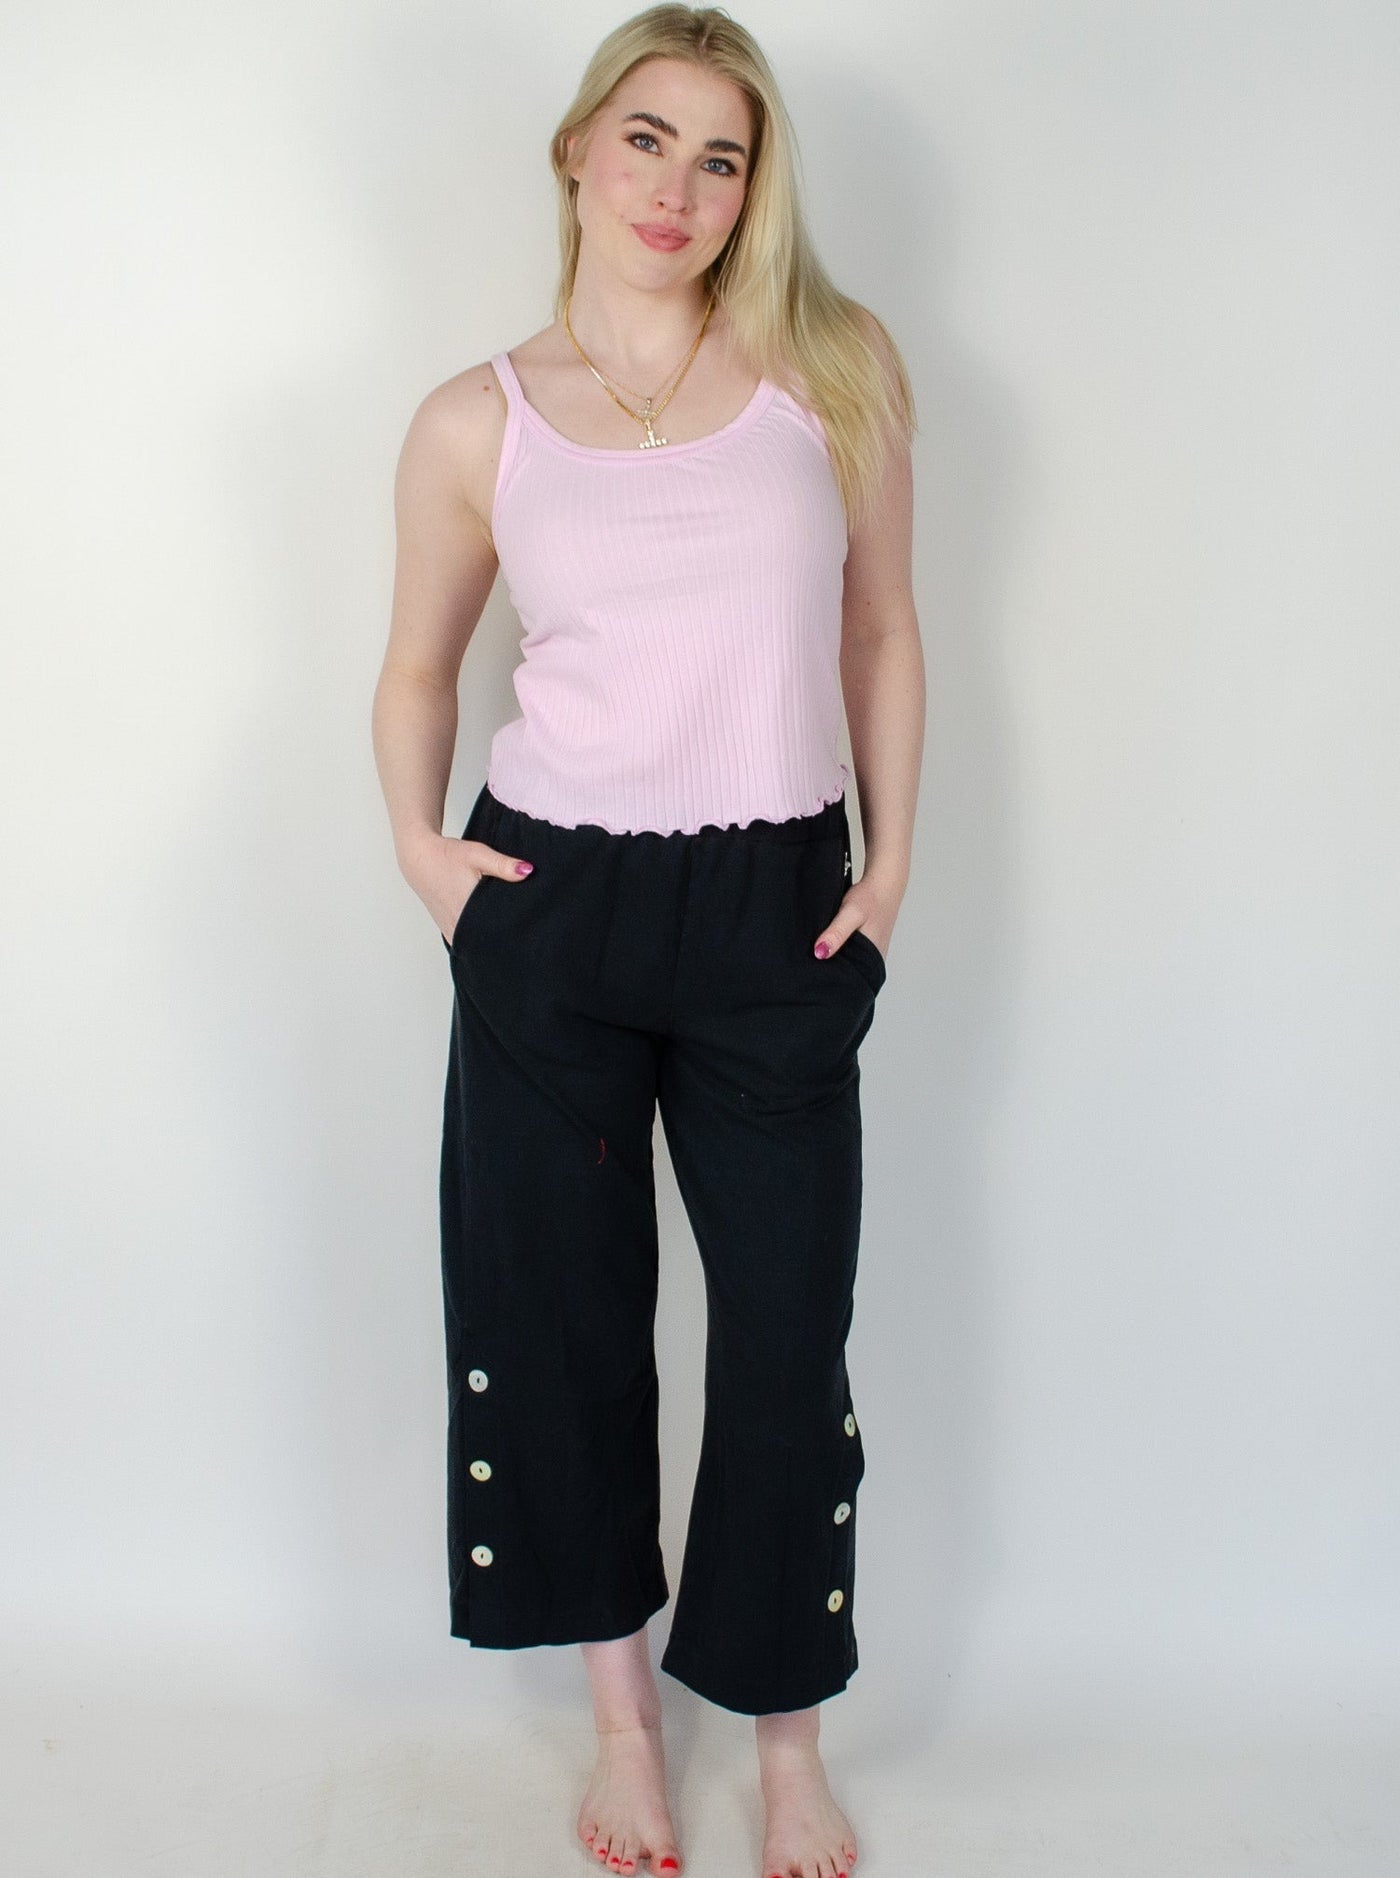 Model is wearing a black low rise sweatpant with slits on the outside of ankle with button details. 